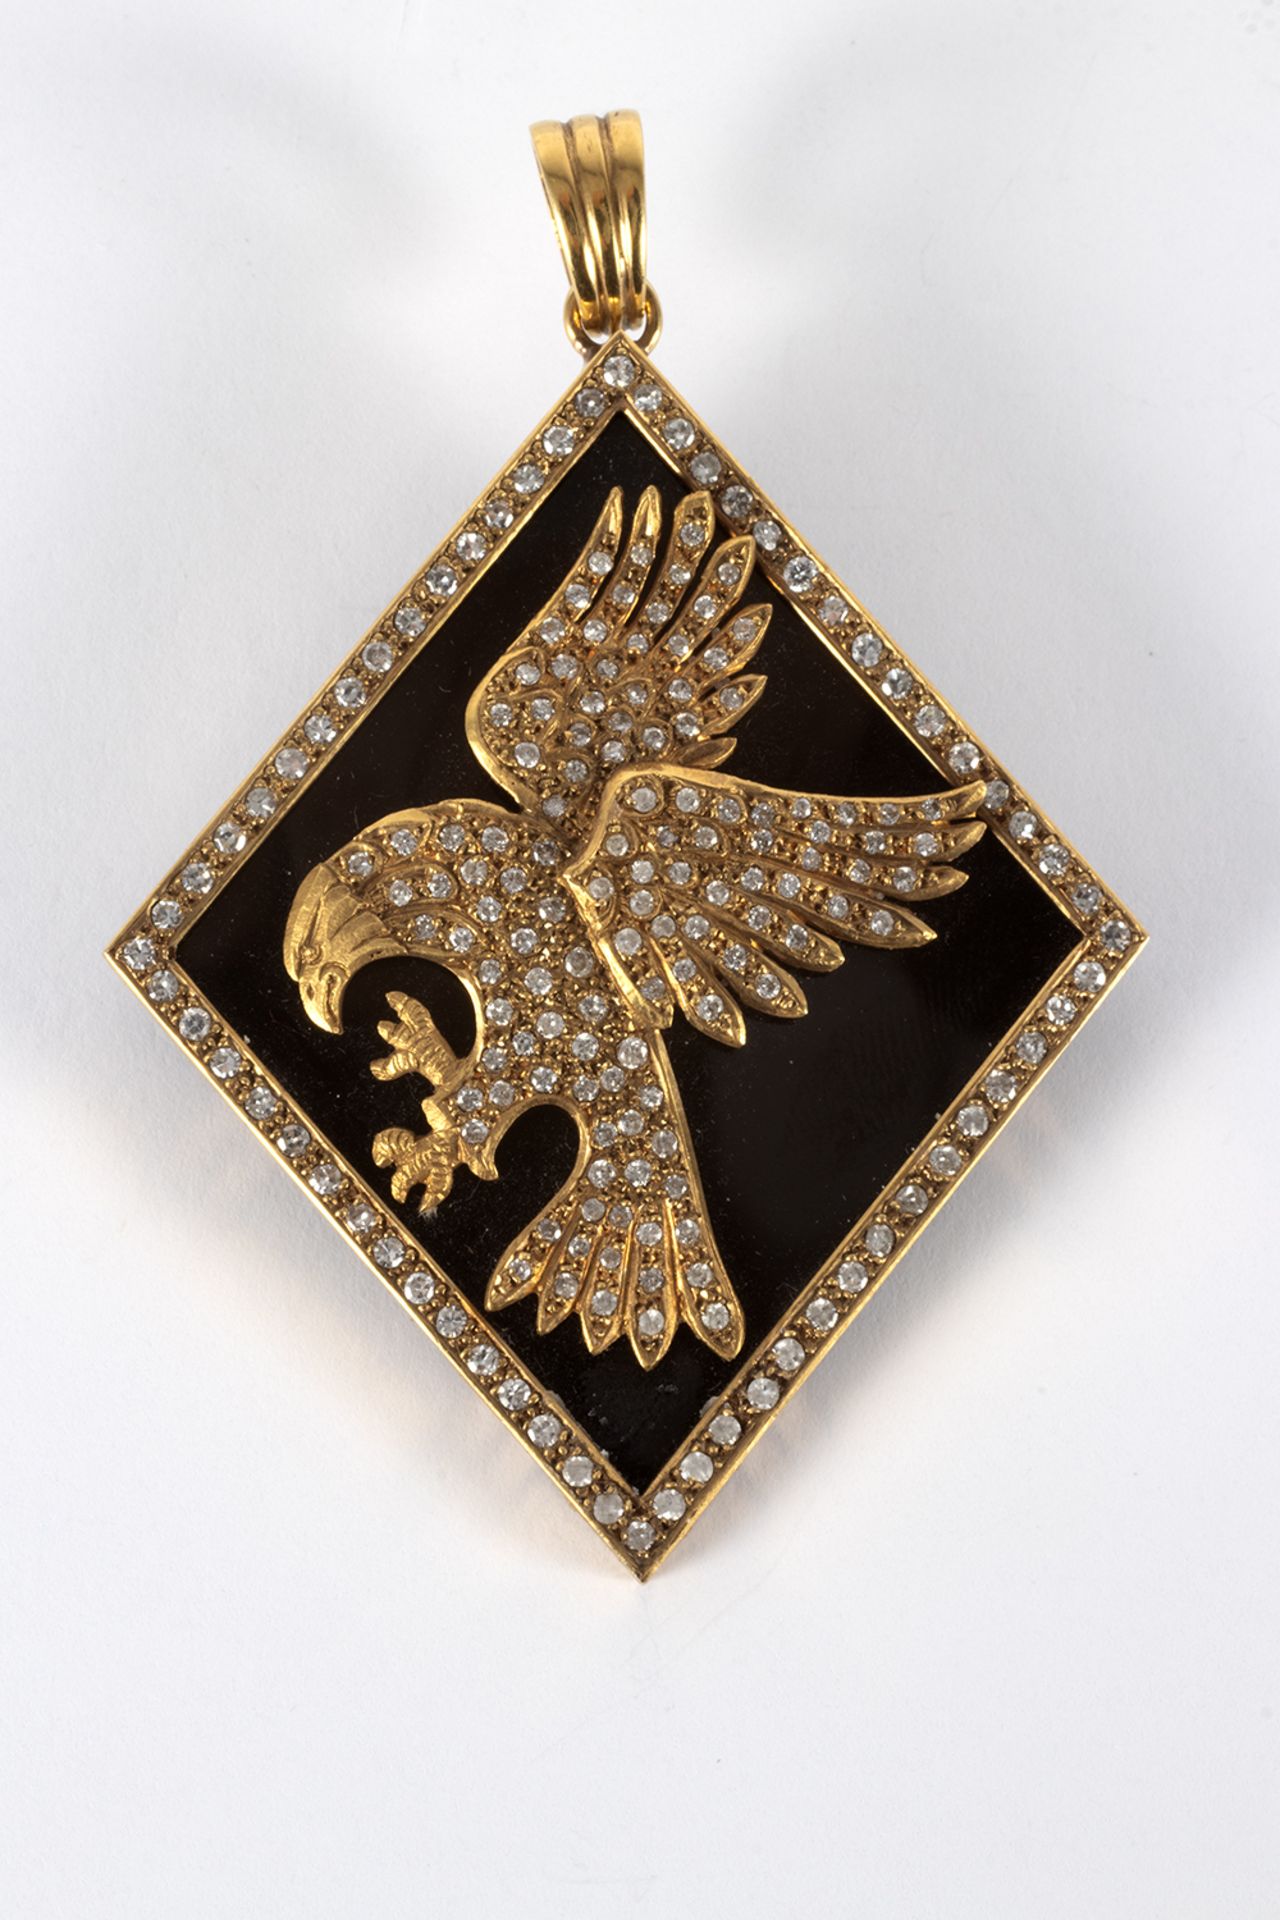 Pendant in gold and brilliant-cut diamonds in the shape of an eagle on an onyx plate.